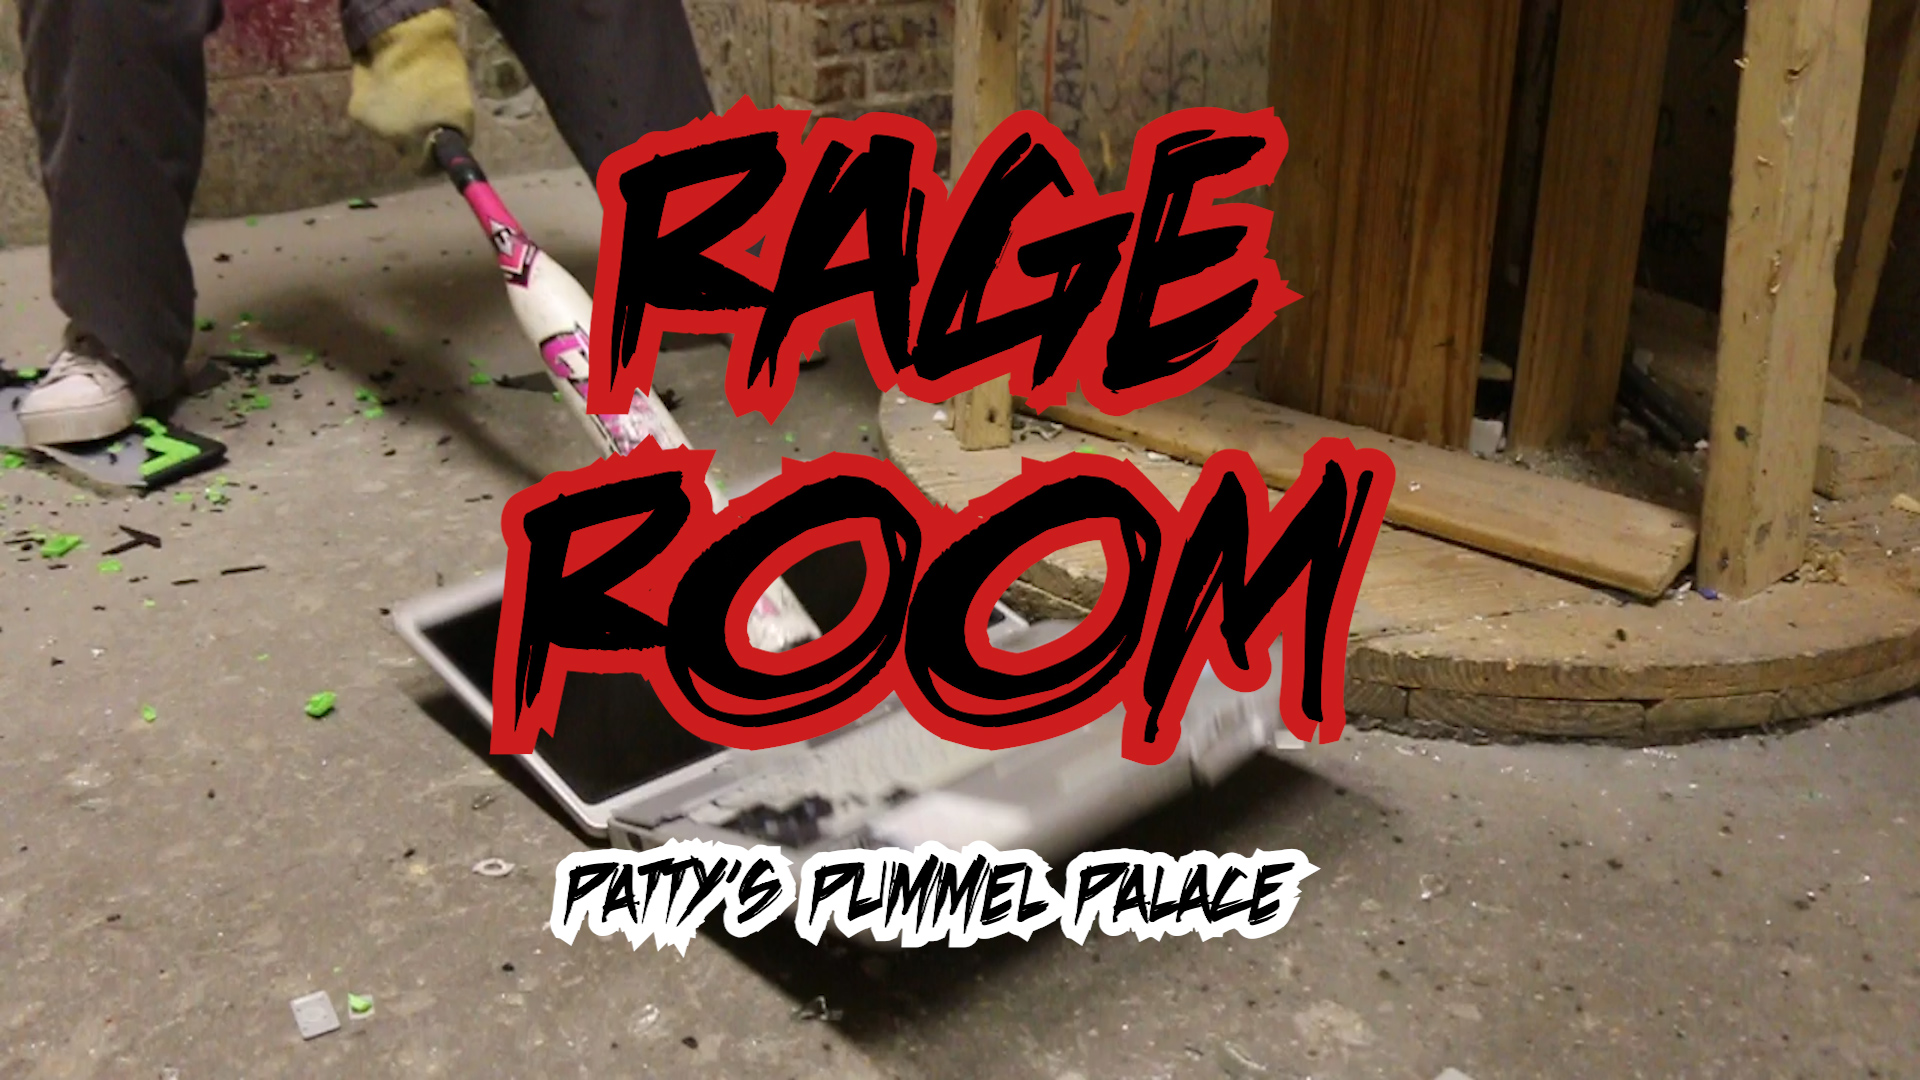 A person holding a bat smashes a laptop. Text reading “Rage Room: Patty’s Pummel Palace” overlays the image